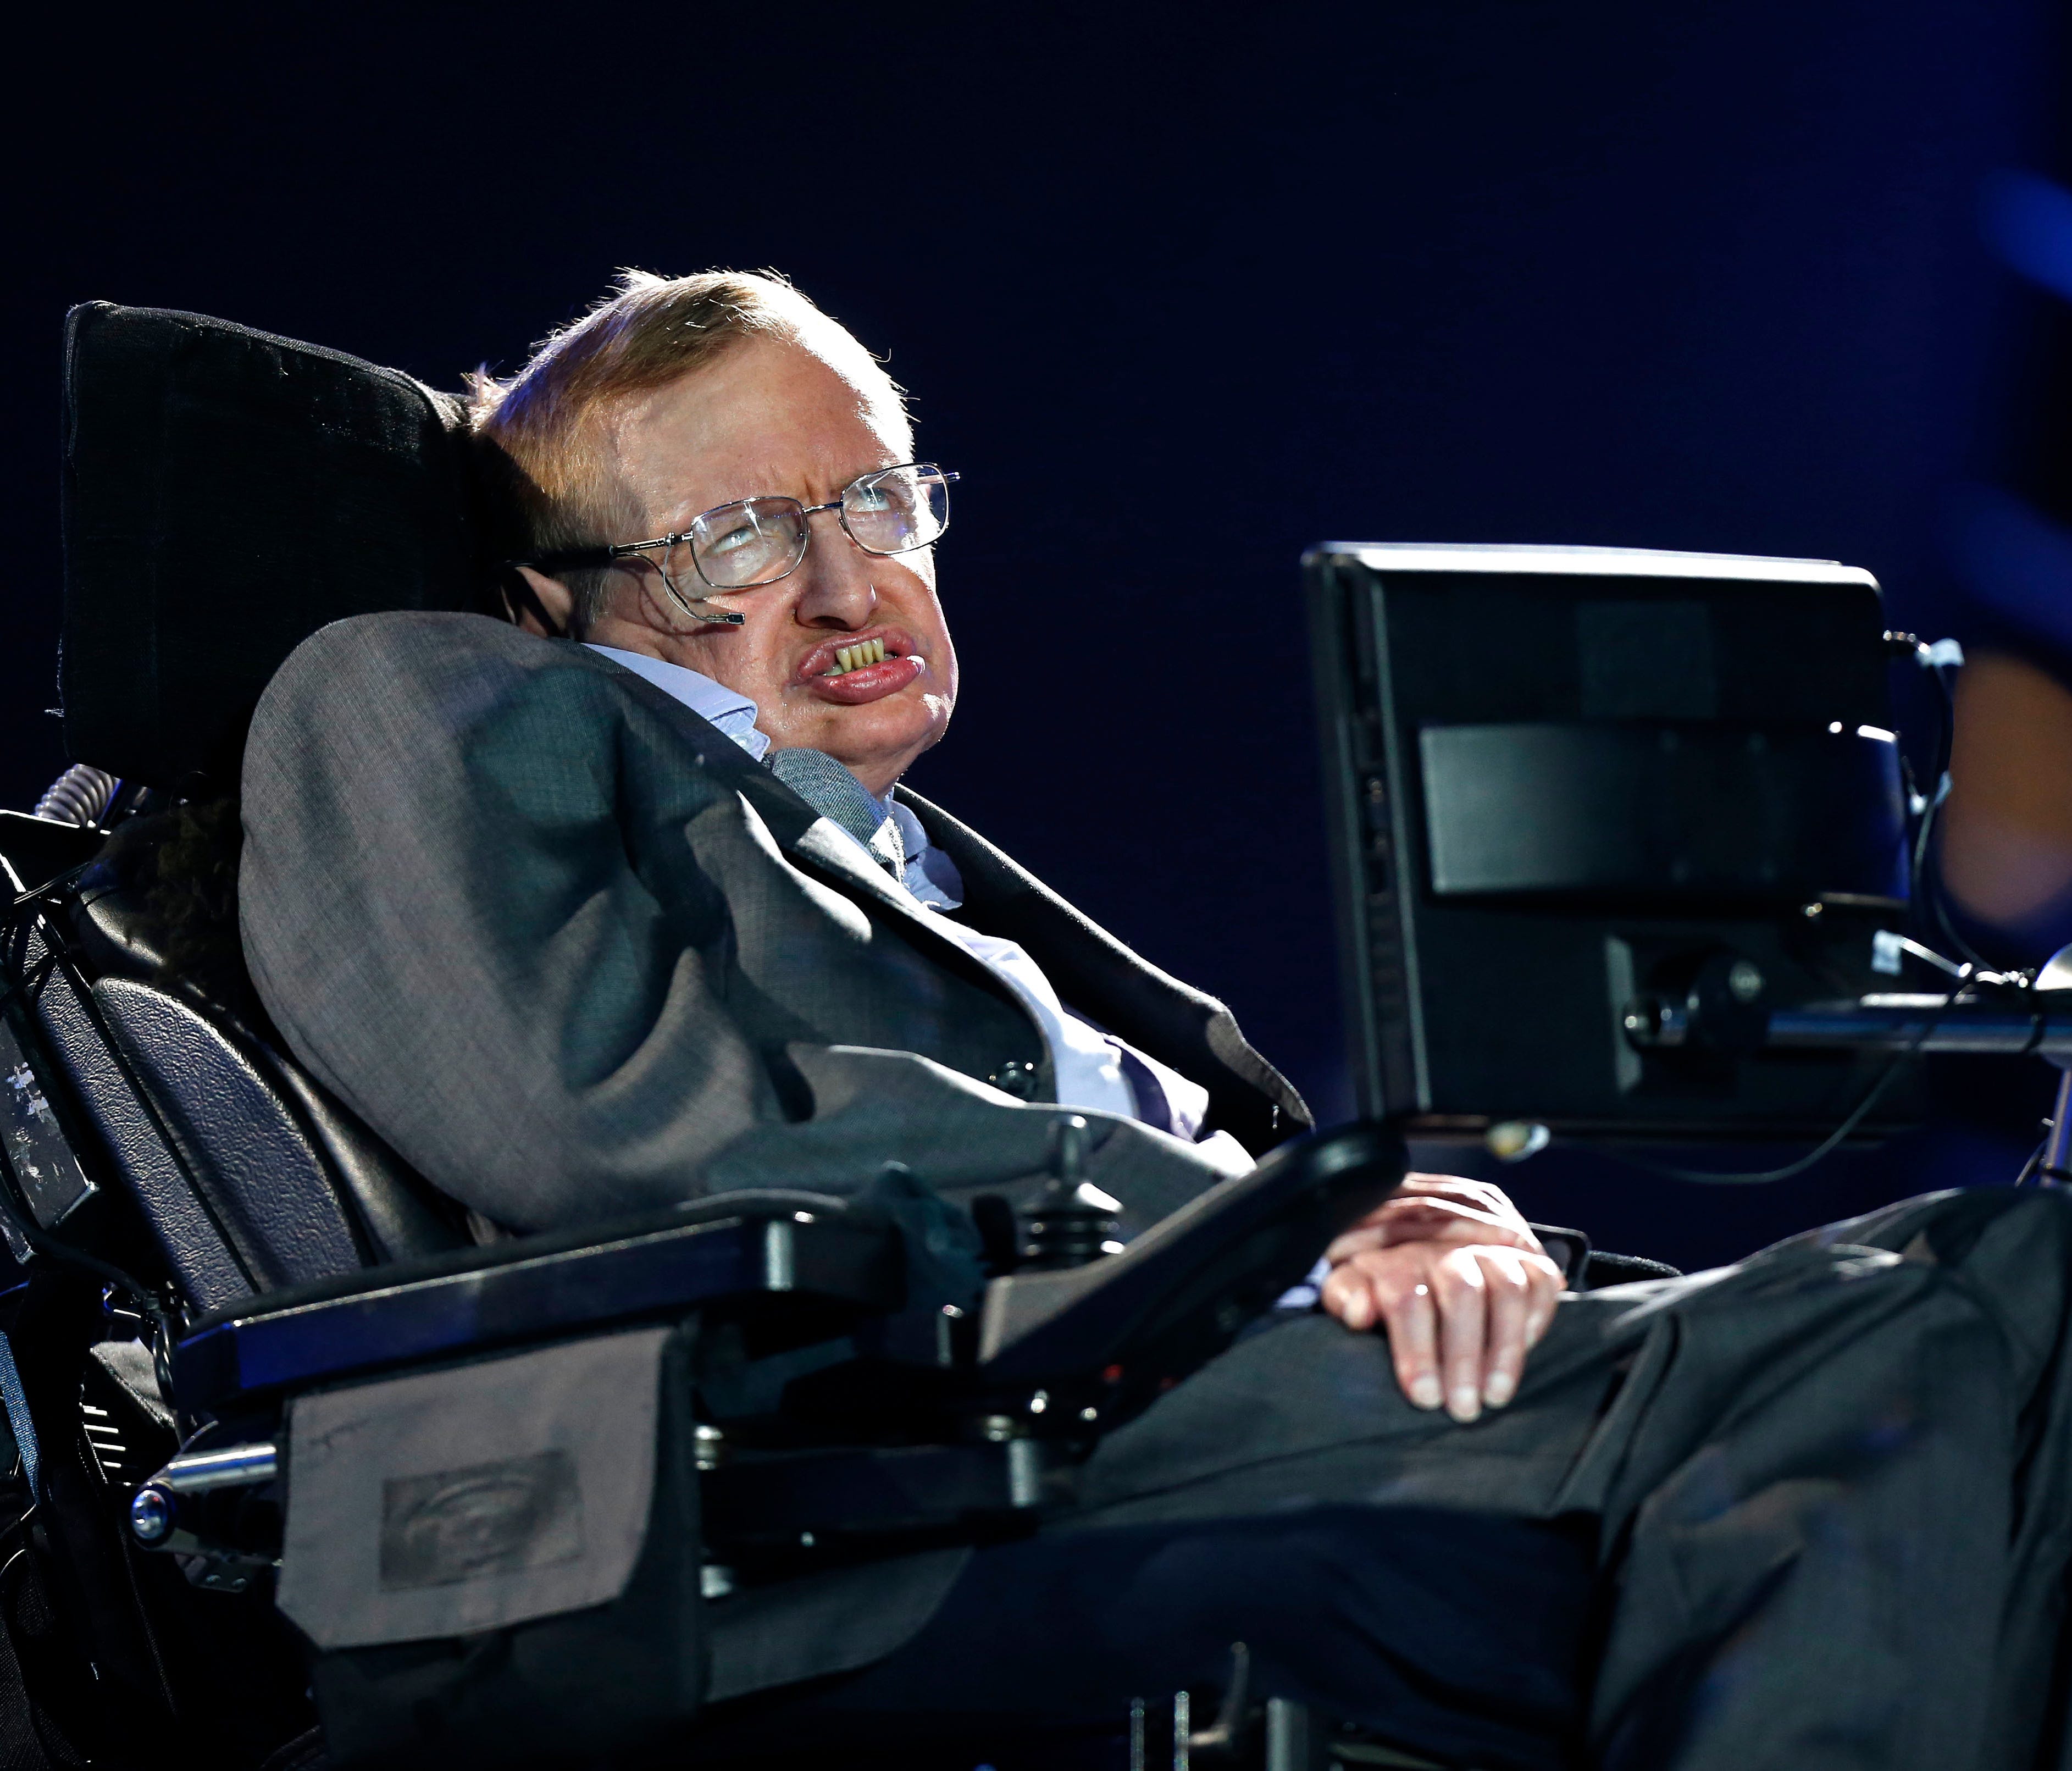 British physicist Stephen Hawking was interviewed on British TV on May 30, 2016, saying U.K. should stay inside the European Union because of its support for research, and he cannot fathom the popularity of presumptive candidate for U.S. president Do